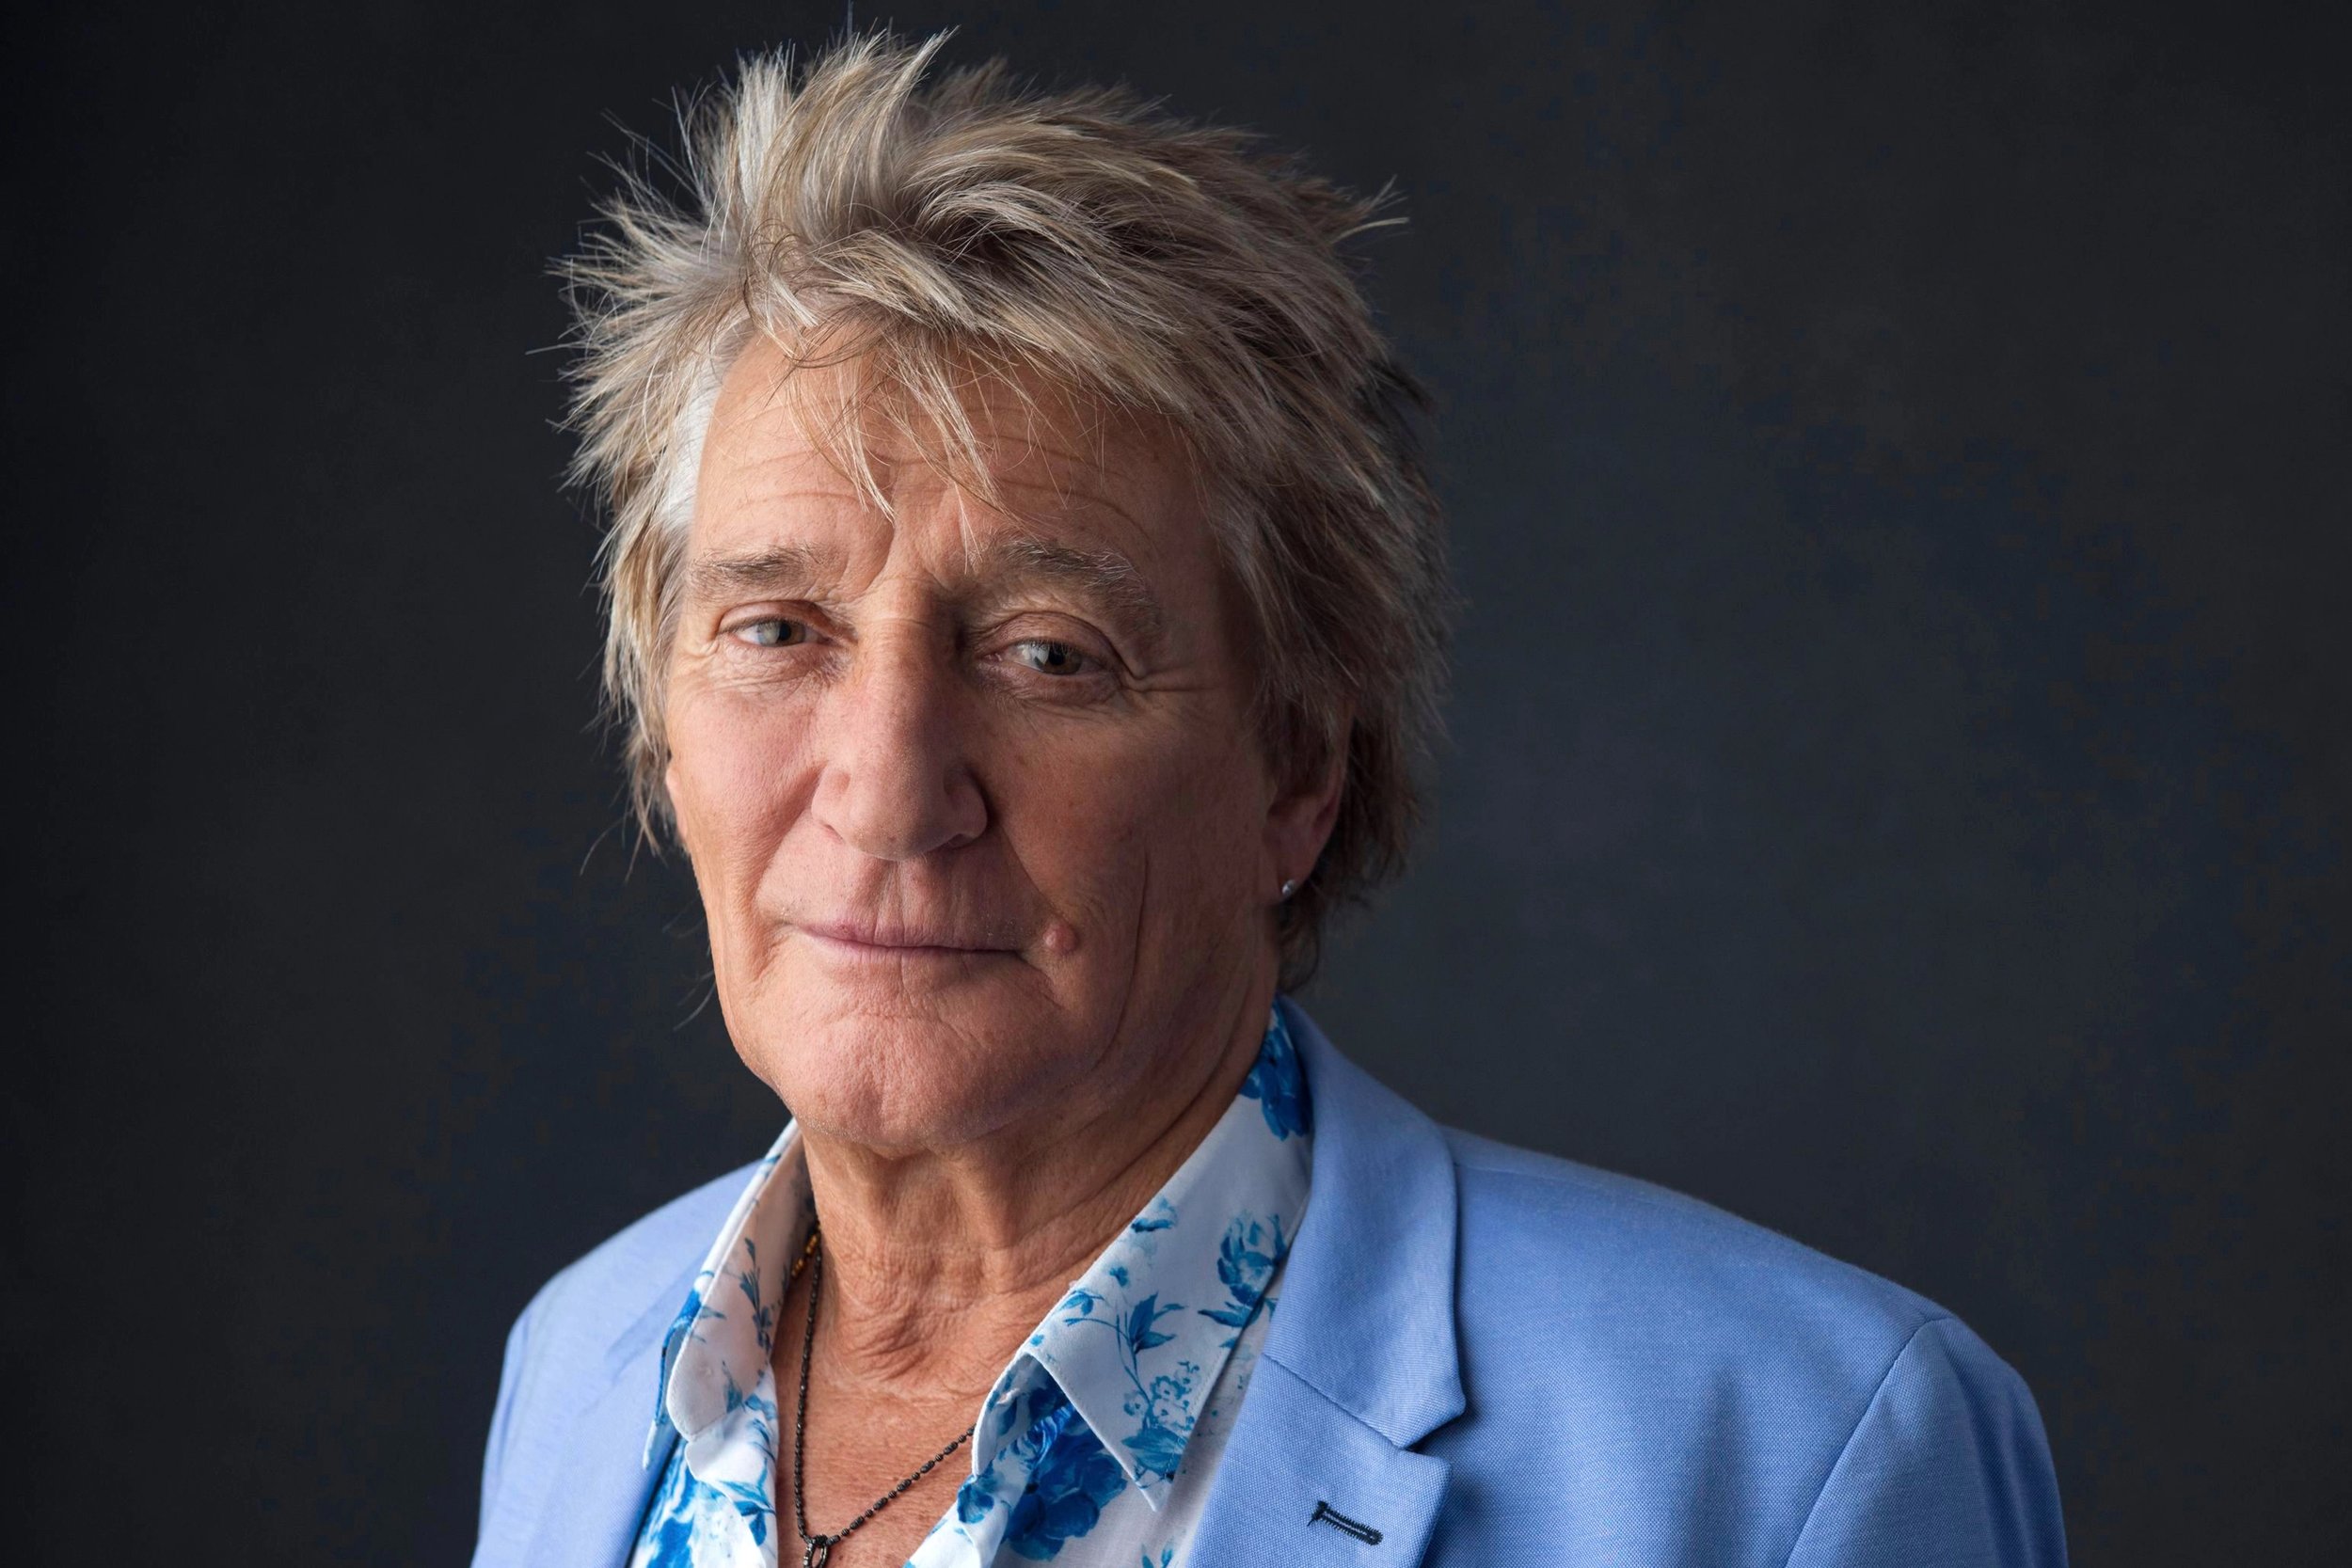 rod-stewart-guide-to-life-podcast.jpg